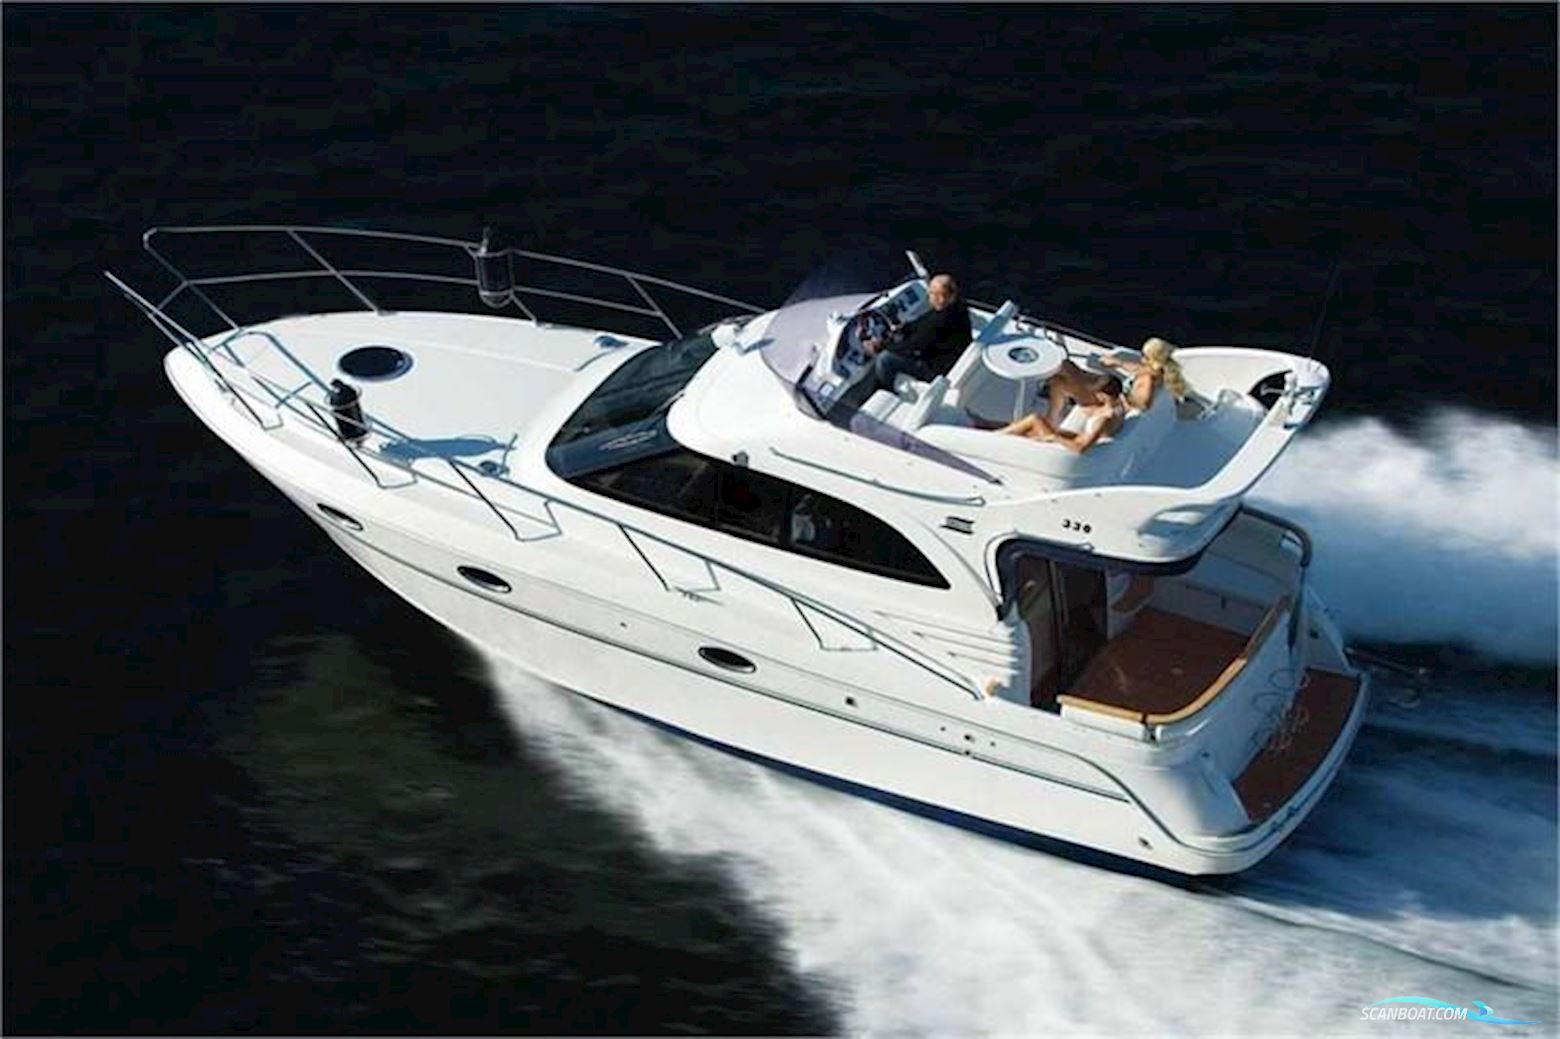 Galeon 330 Motor boat 2006, with Volvo Penta D4 engine, Italy